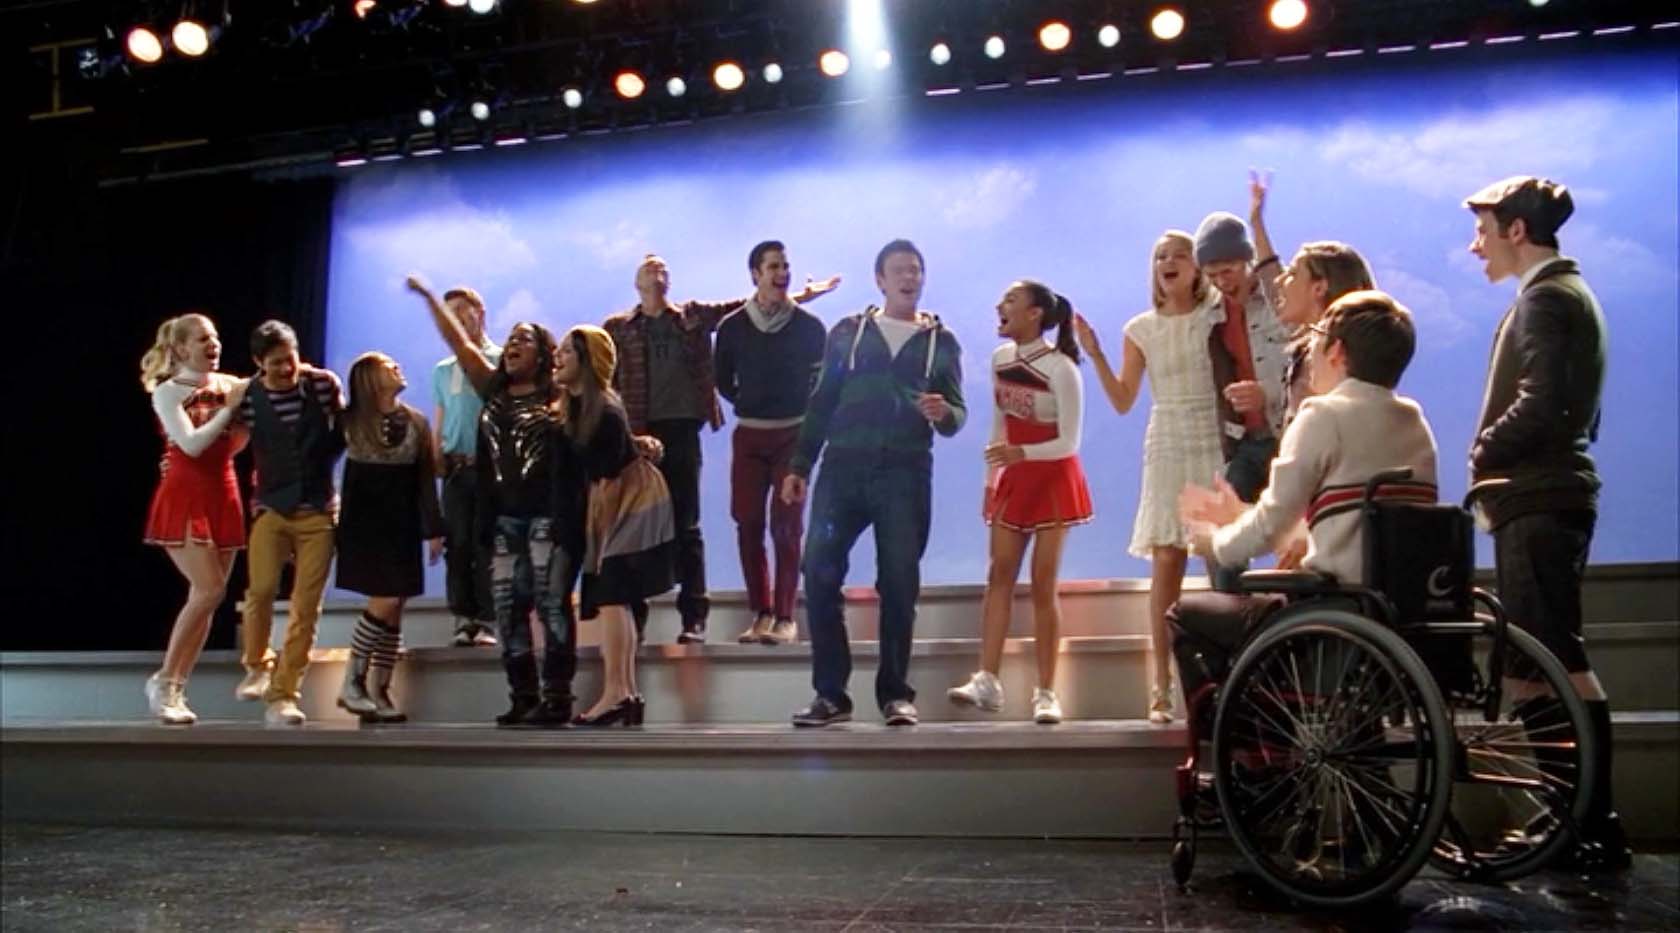 glee-performances-best-we-are-young.jpg